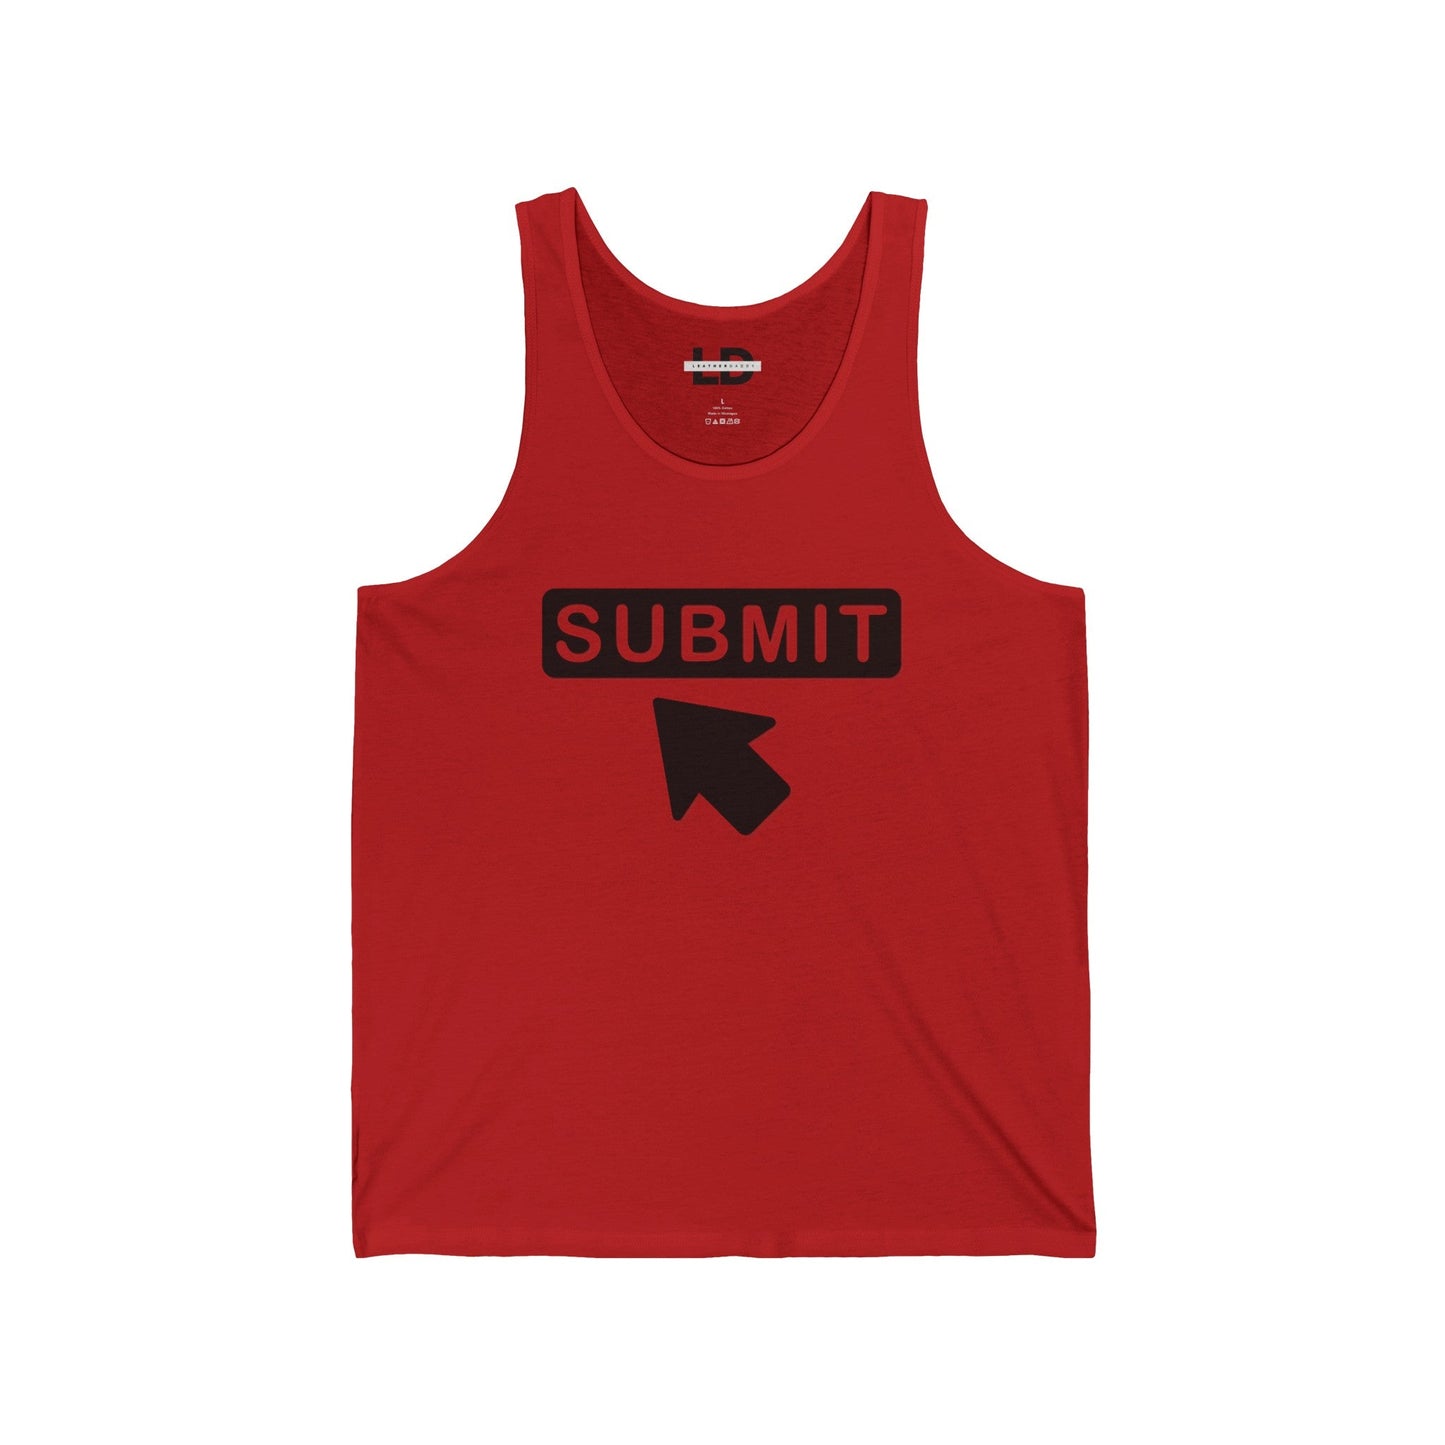 Tank Top XS / Red Press To Submit Tank Top - LeatherDaddy LEATHERDADDY BATOR